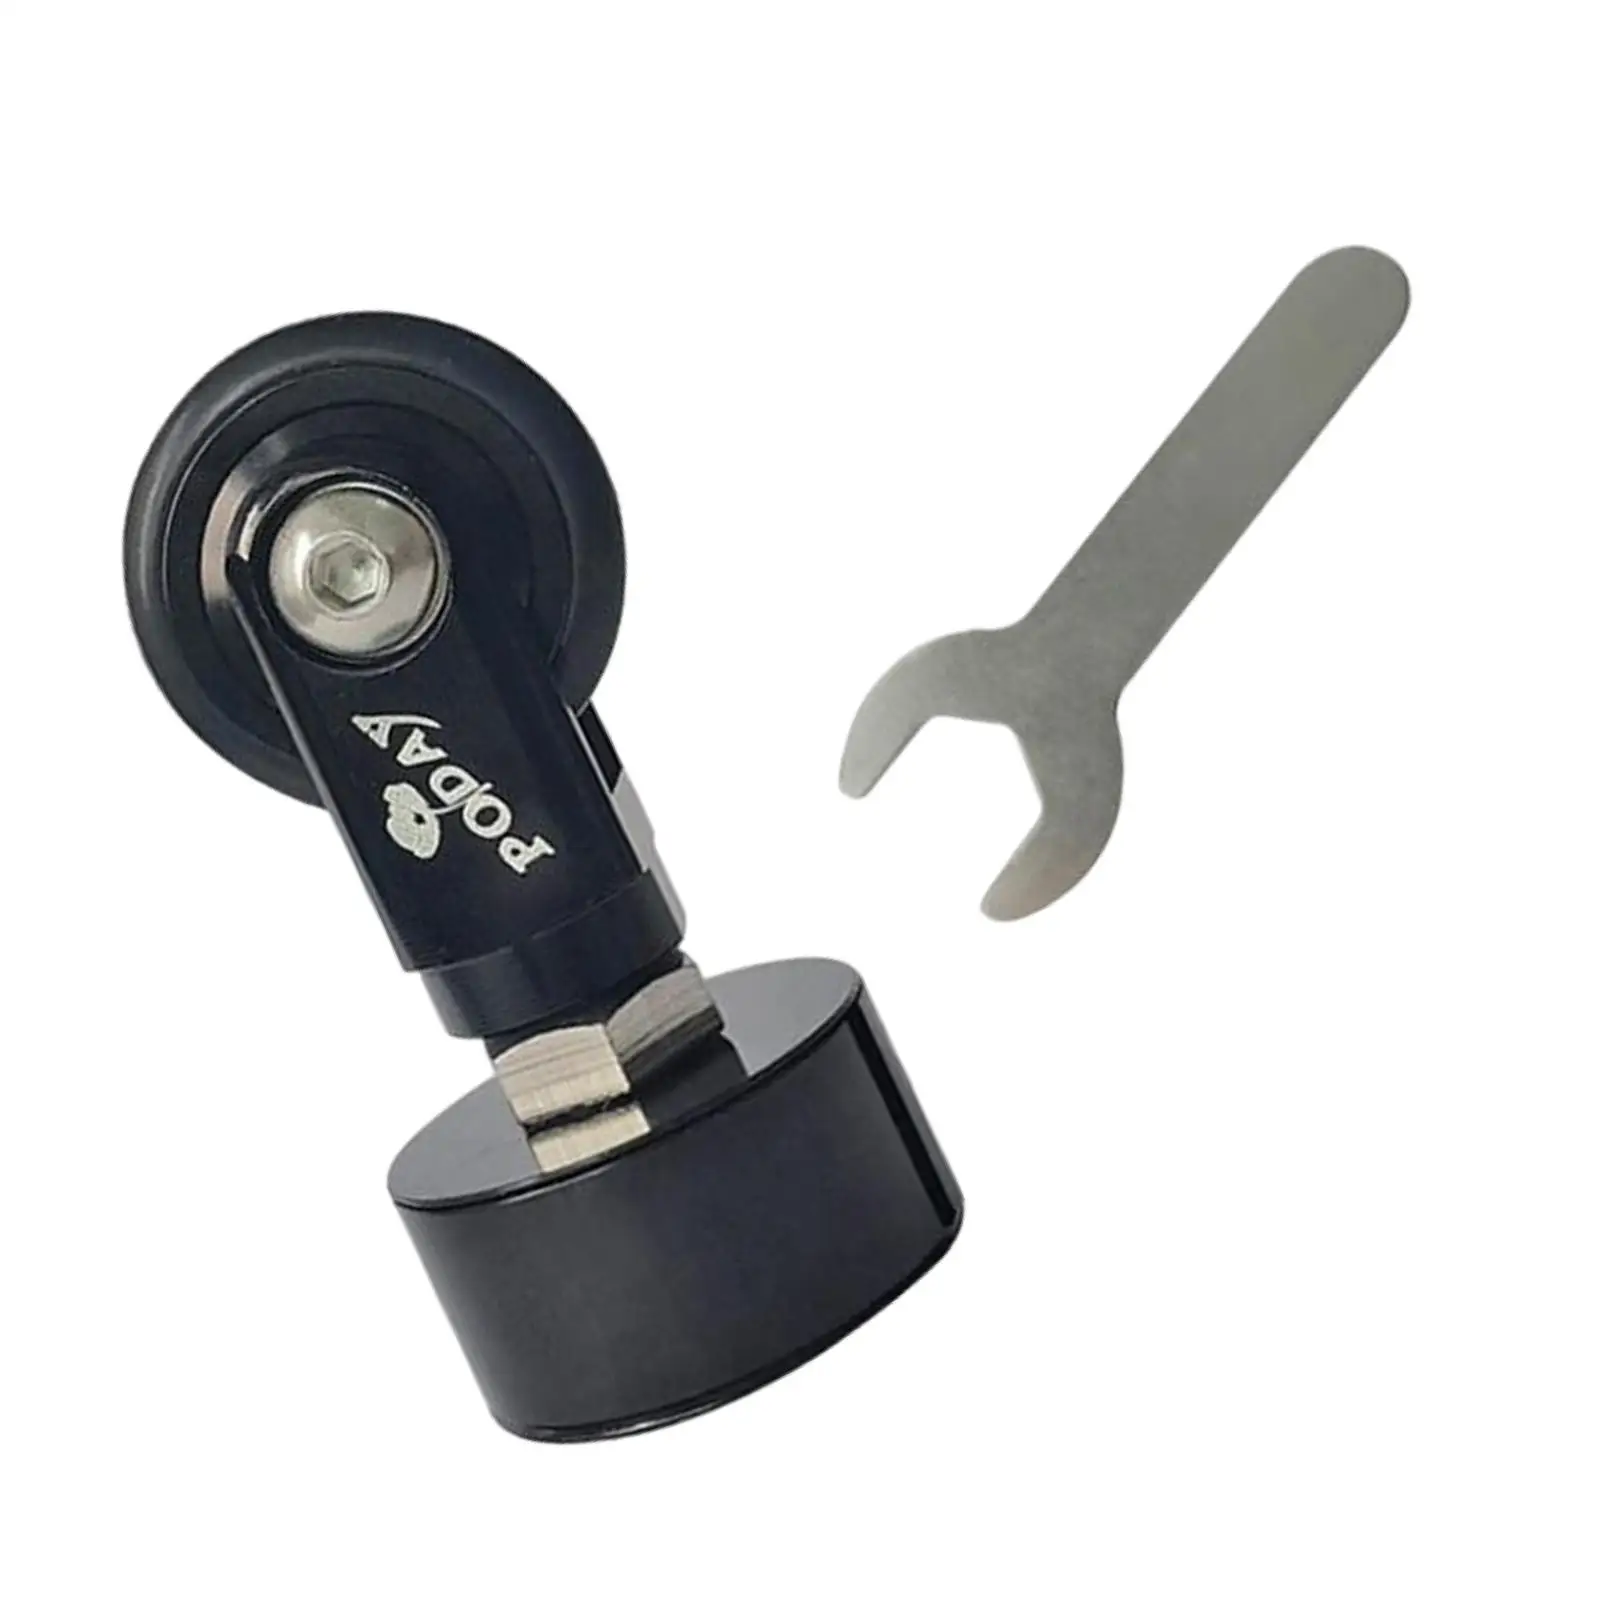  Wheel 33.9mm Embedded Roller 360 Rotation Caster for Camping